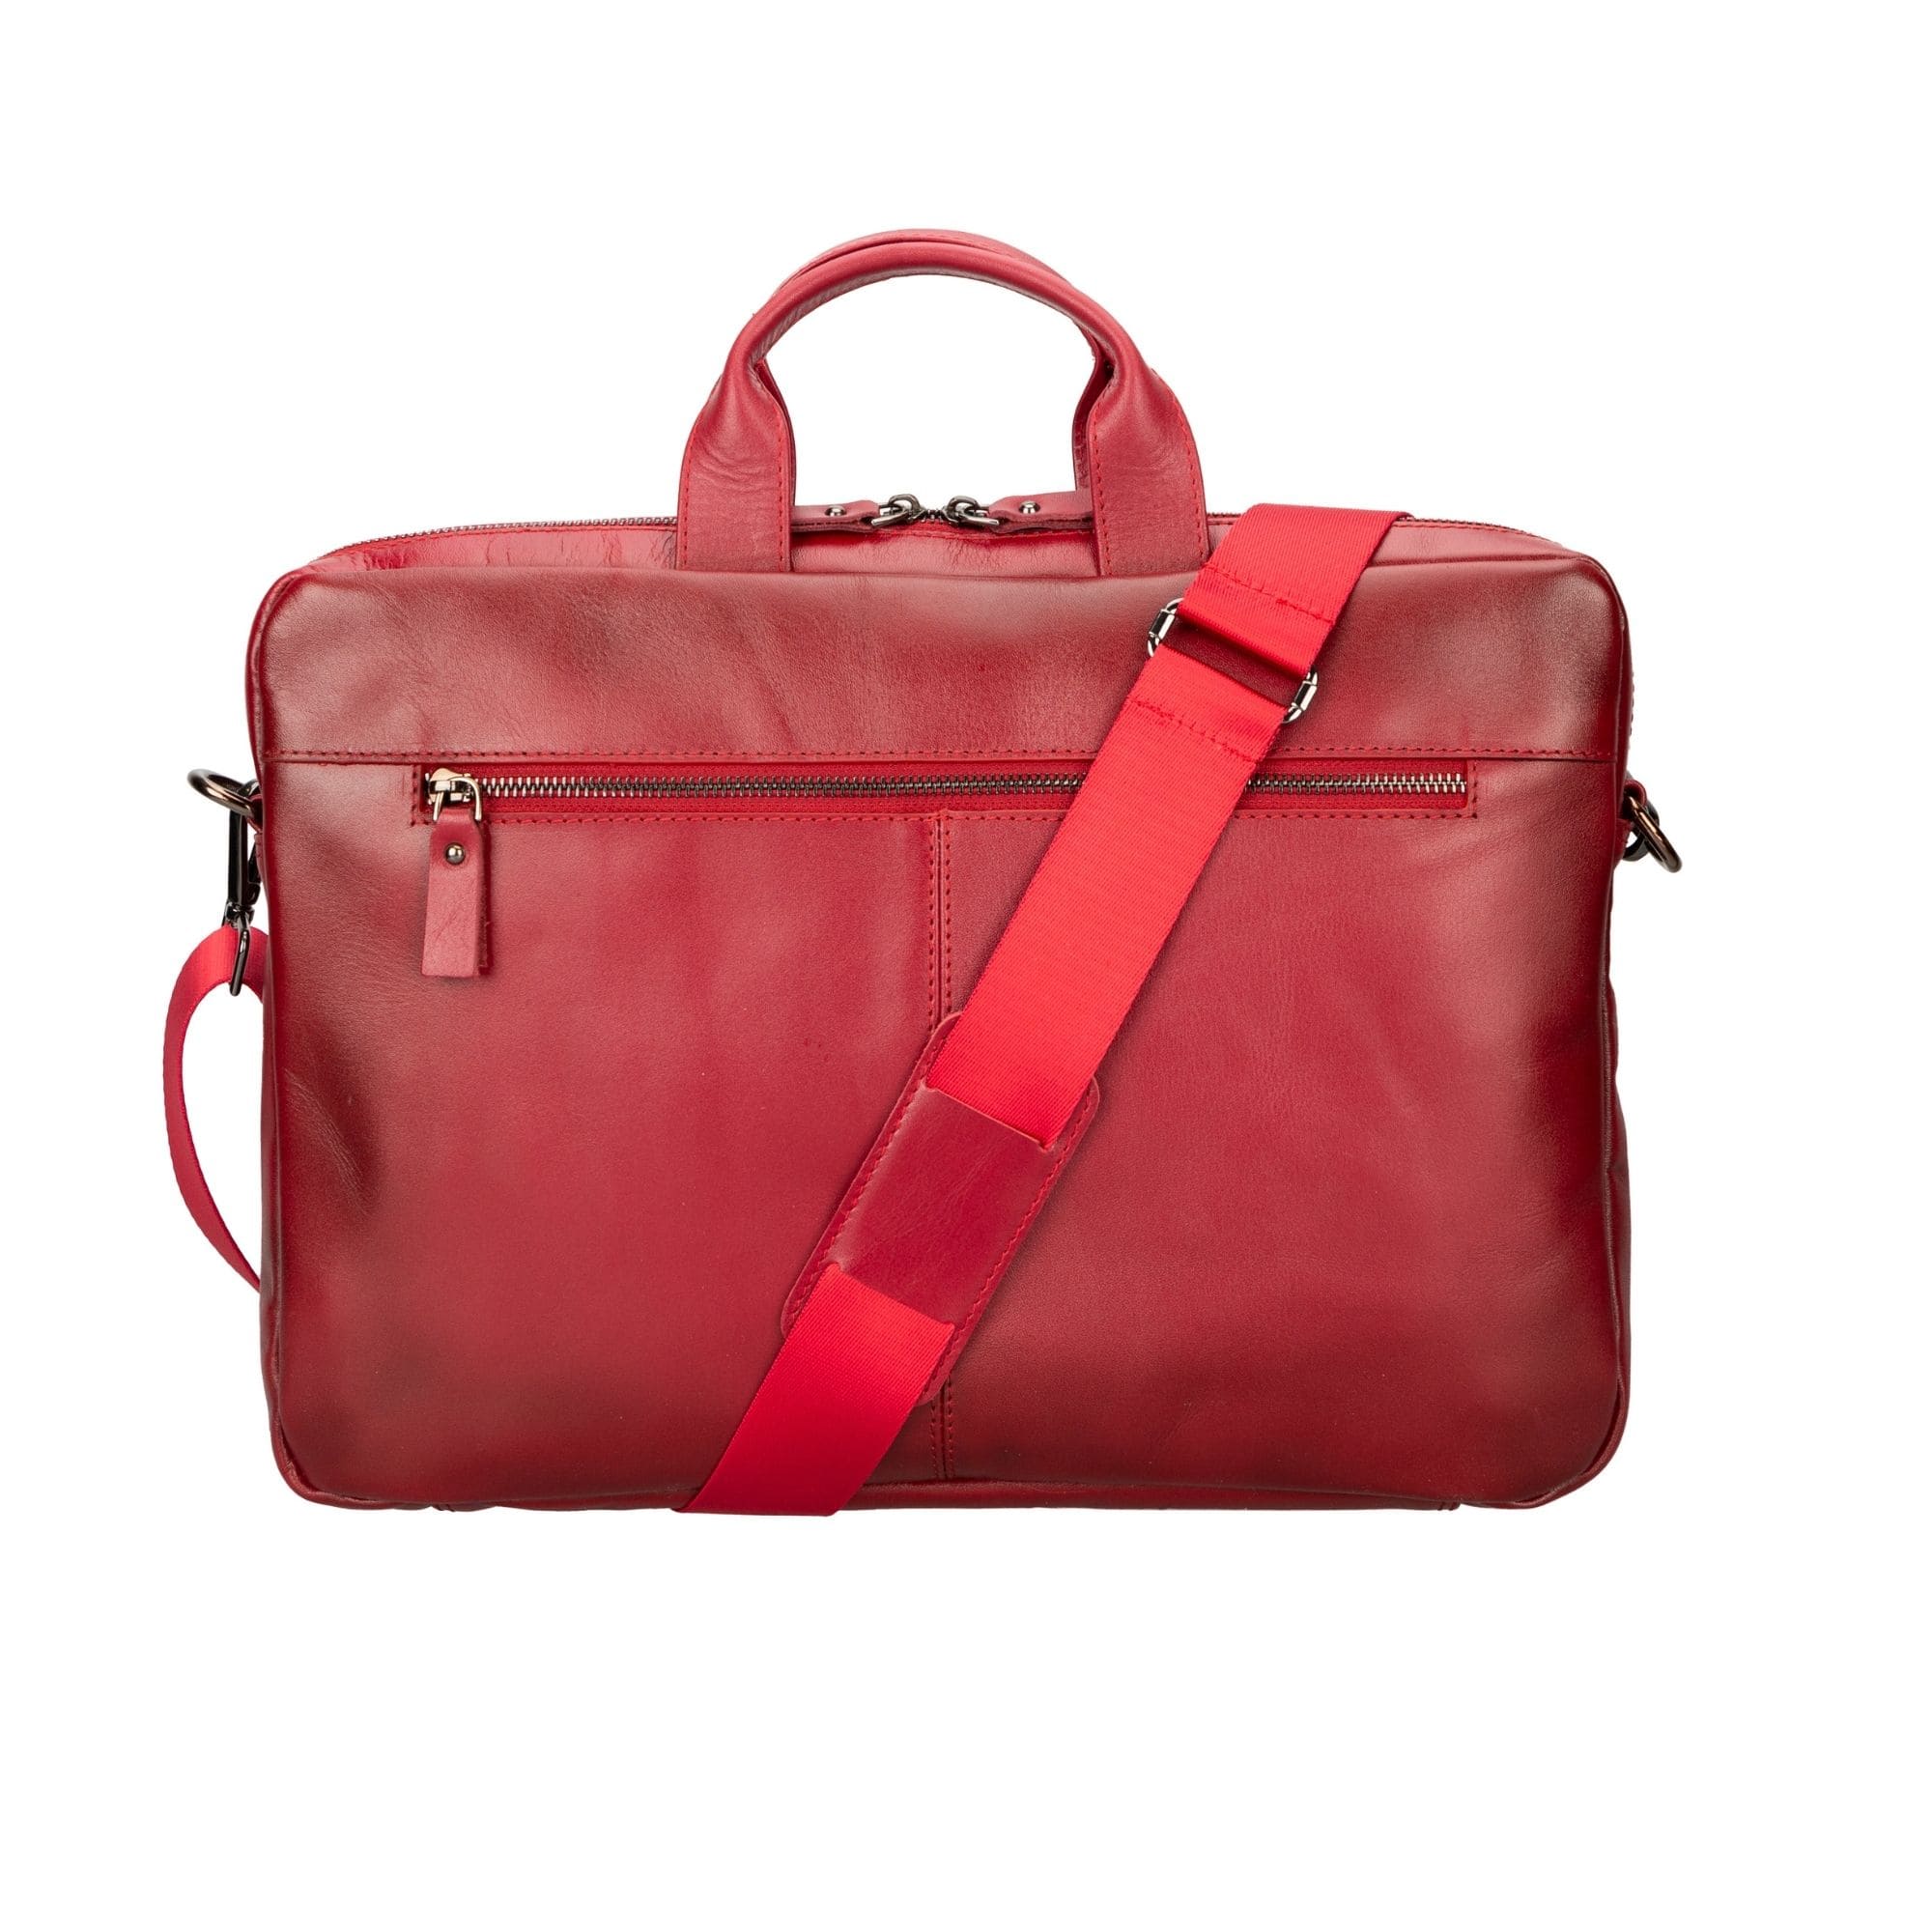 Afton MacBook Leather Sleeve and Bag - 14 Inches - Red - TORONATA